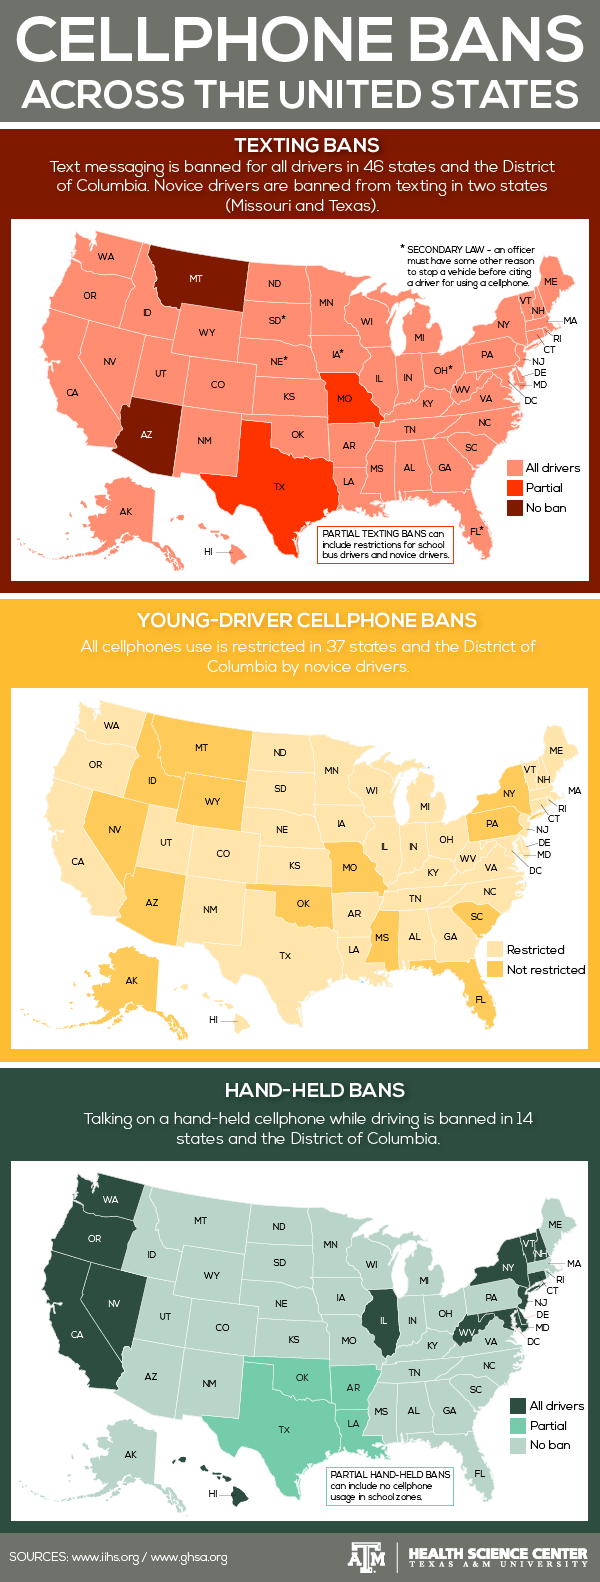 Cellphone ban infographic.